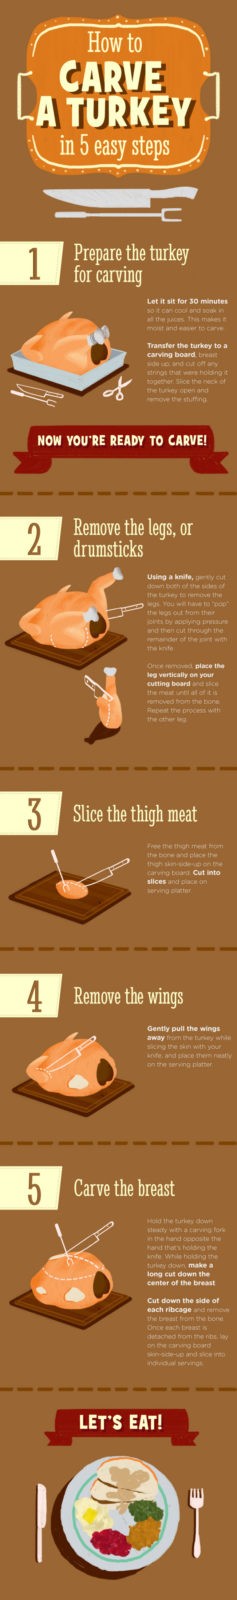 How to carve a turkey infographic